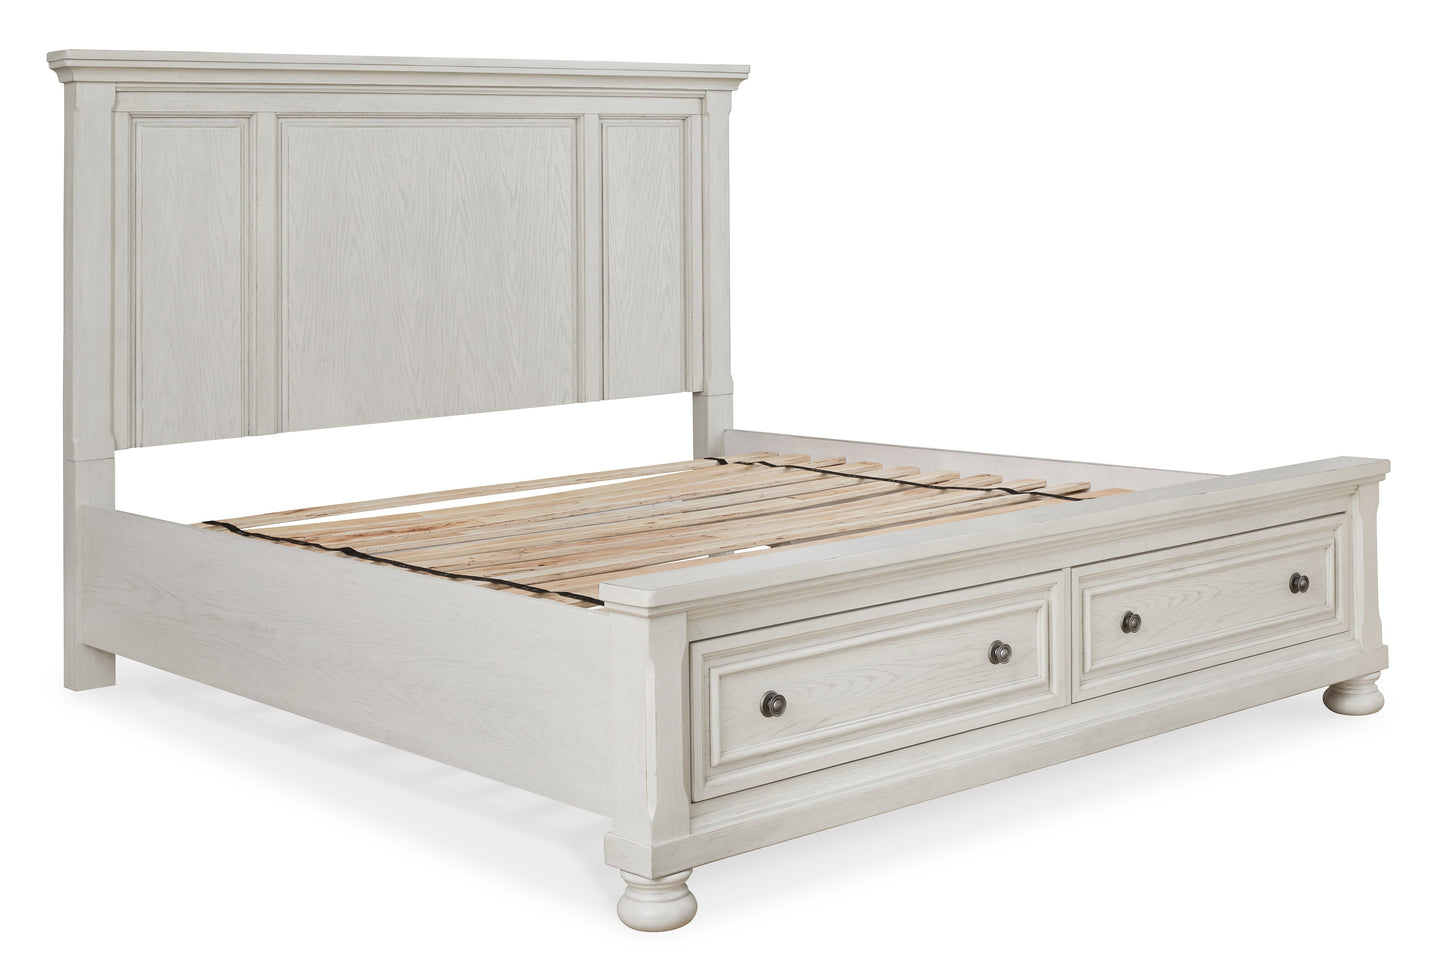 Robbinsdale White Queen Storage Bedroom Set with Dresser, Mirror and Nightstand